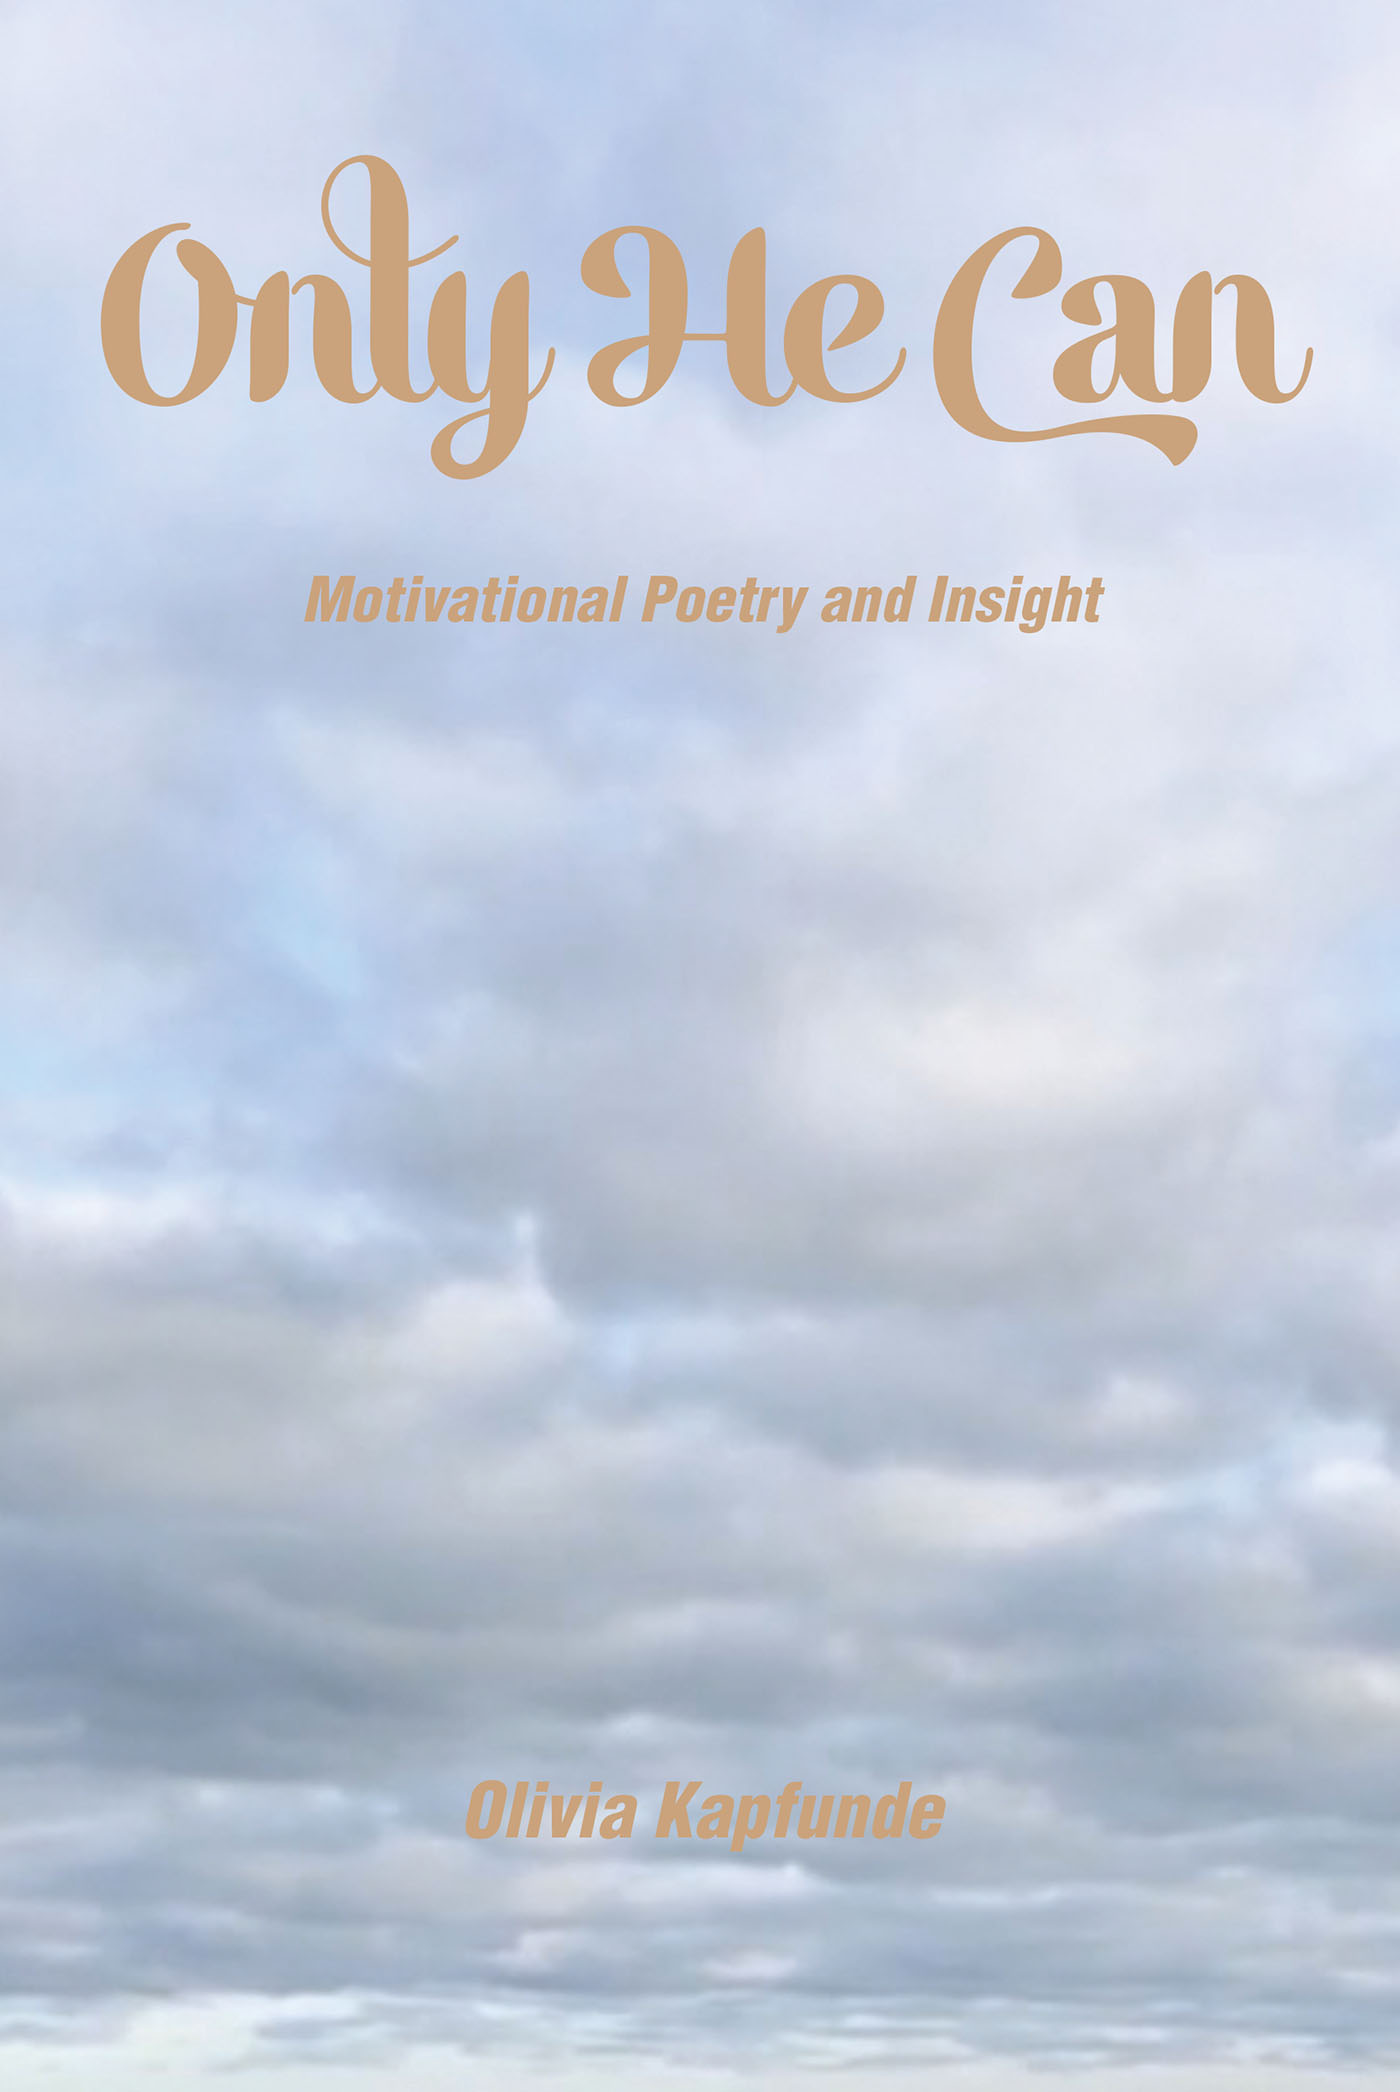 Olivia Kapfunde’s Newly Released "Only He Can: Motivational Poetry and Insight" Shares an Engaging Collection of Spiritually Driven Writings